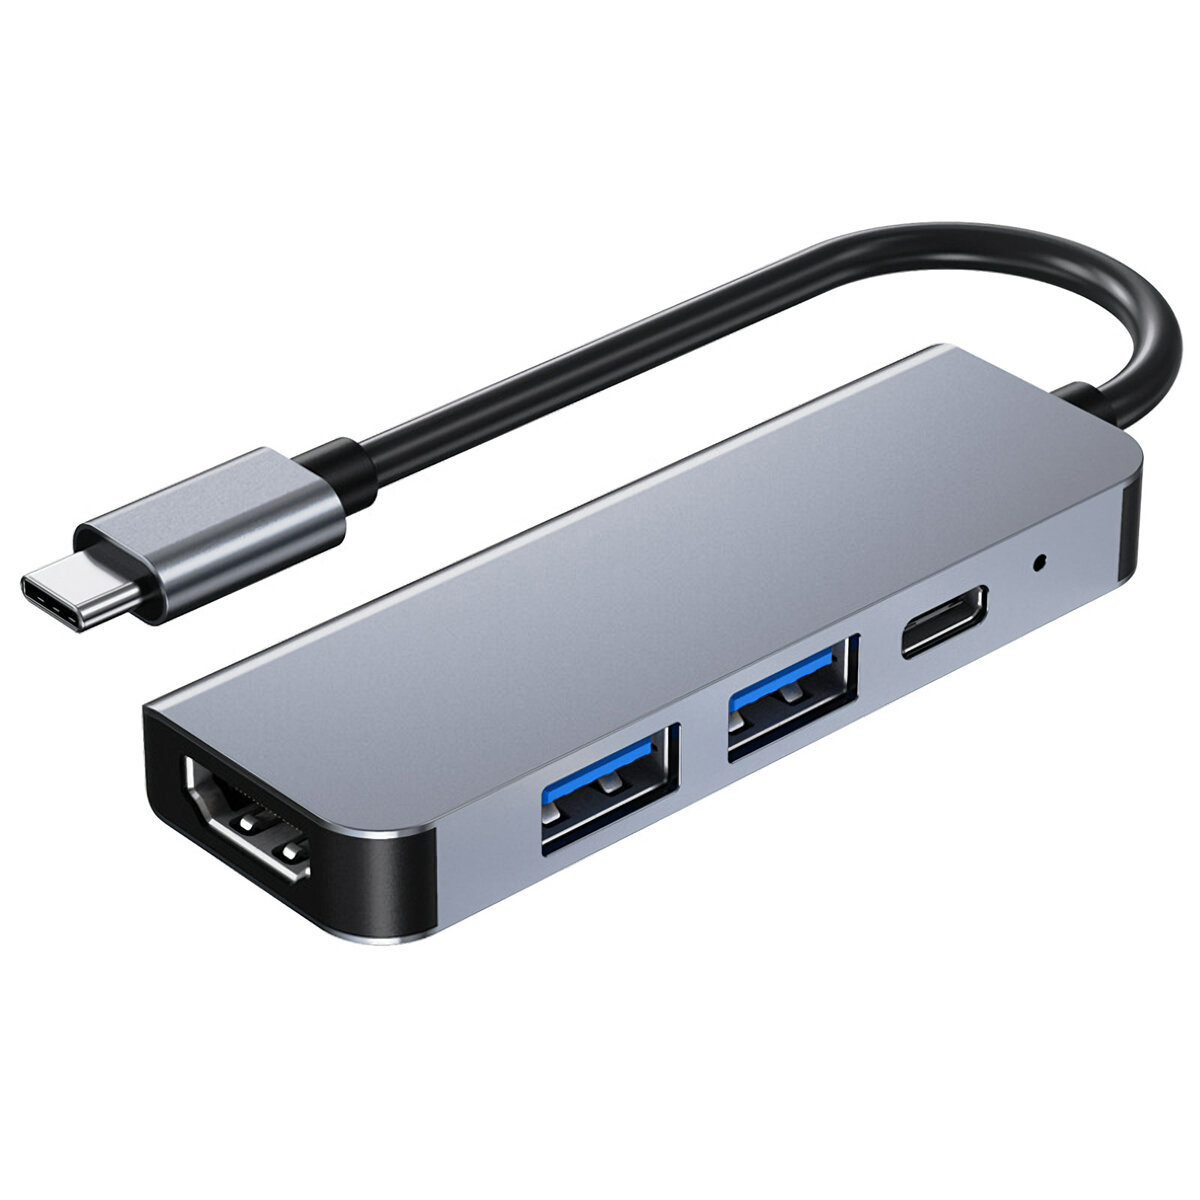 4 In 1 USB 3.0 Hub Type-C Docking Station USB Adapter with USB 2.0 USB 3.0 PD 3.0 Power HDMI for PC Laptop Matebook HUAW